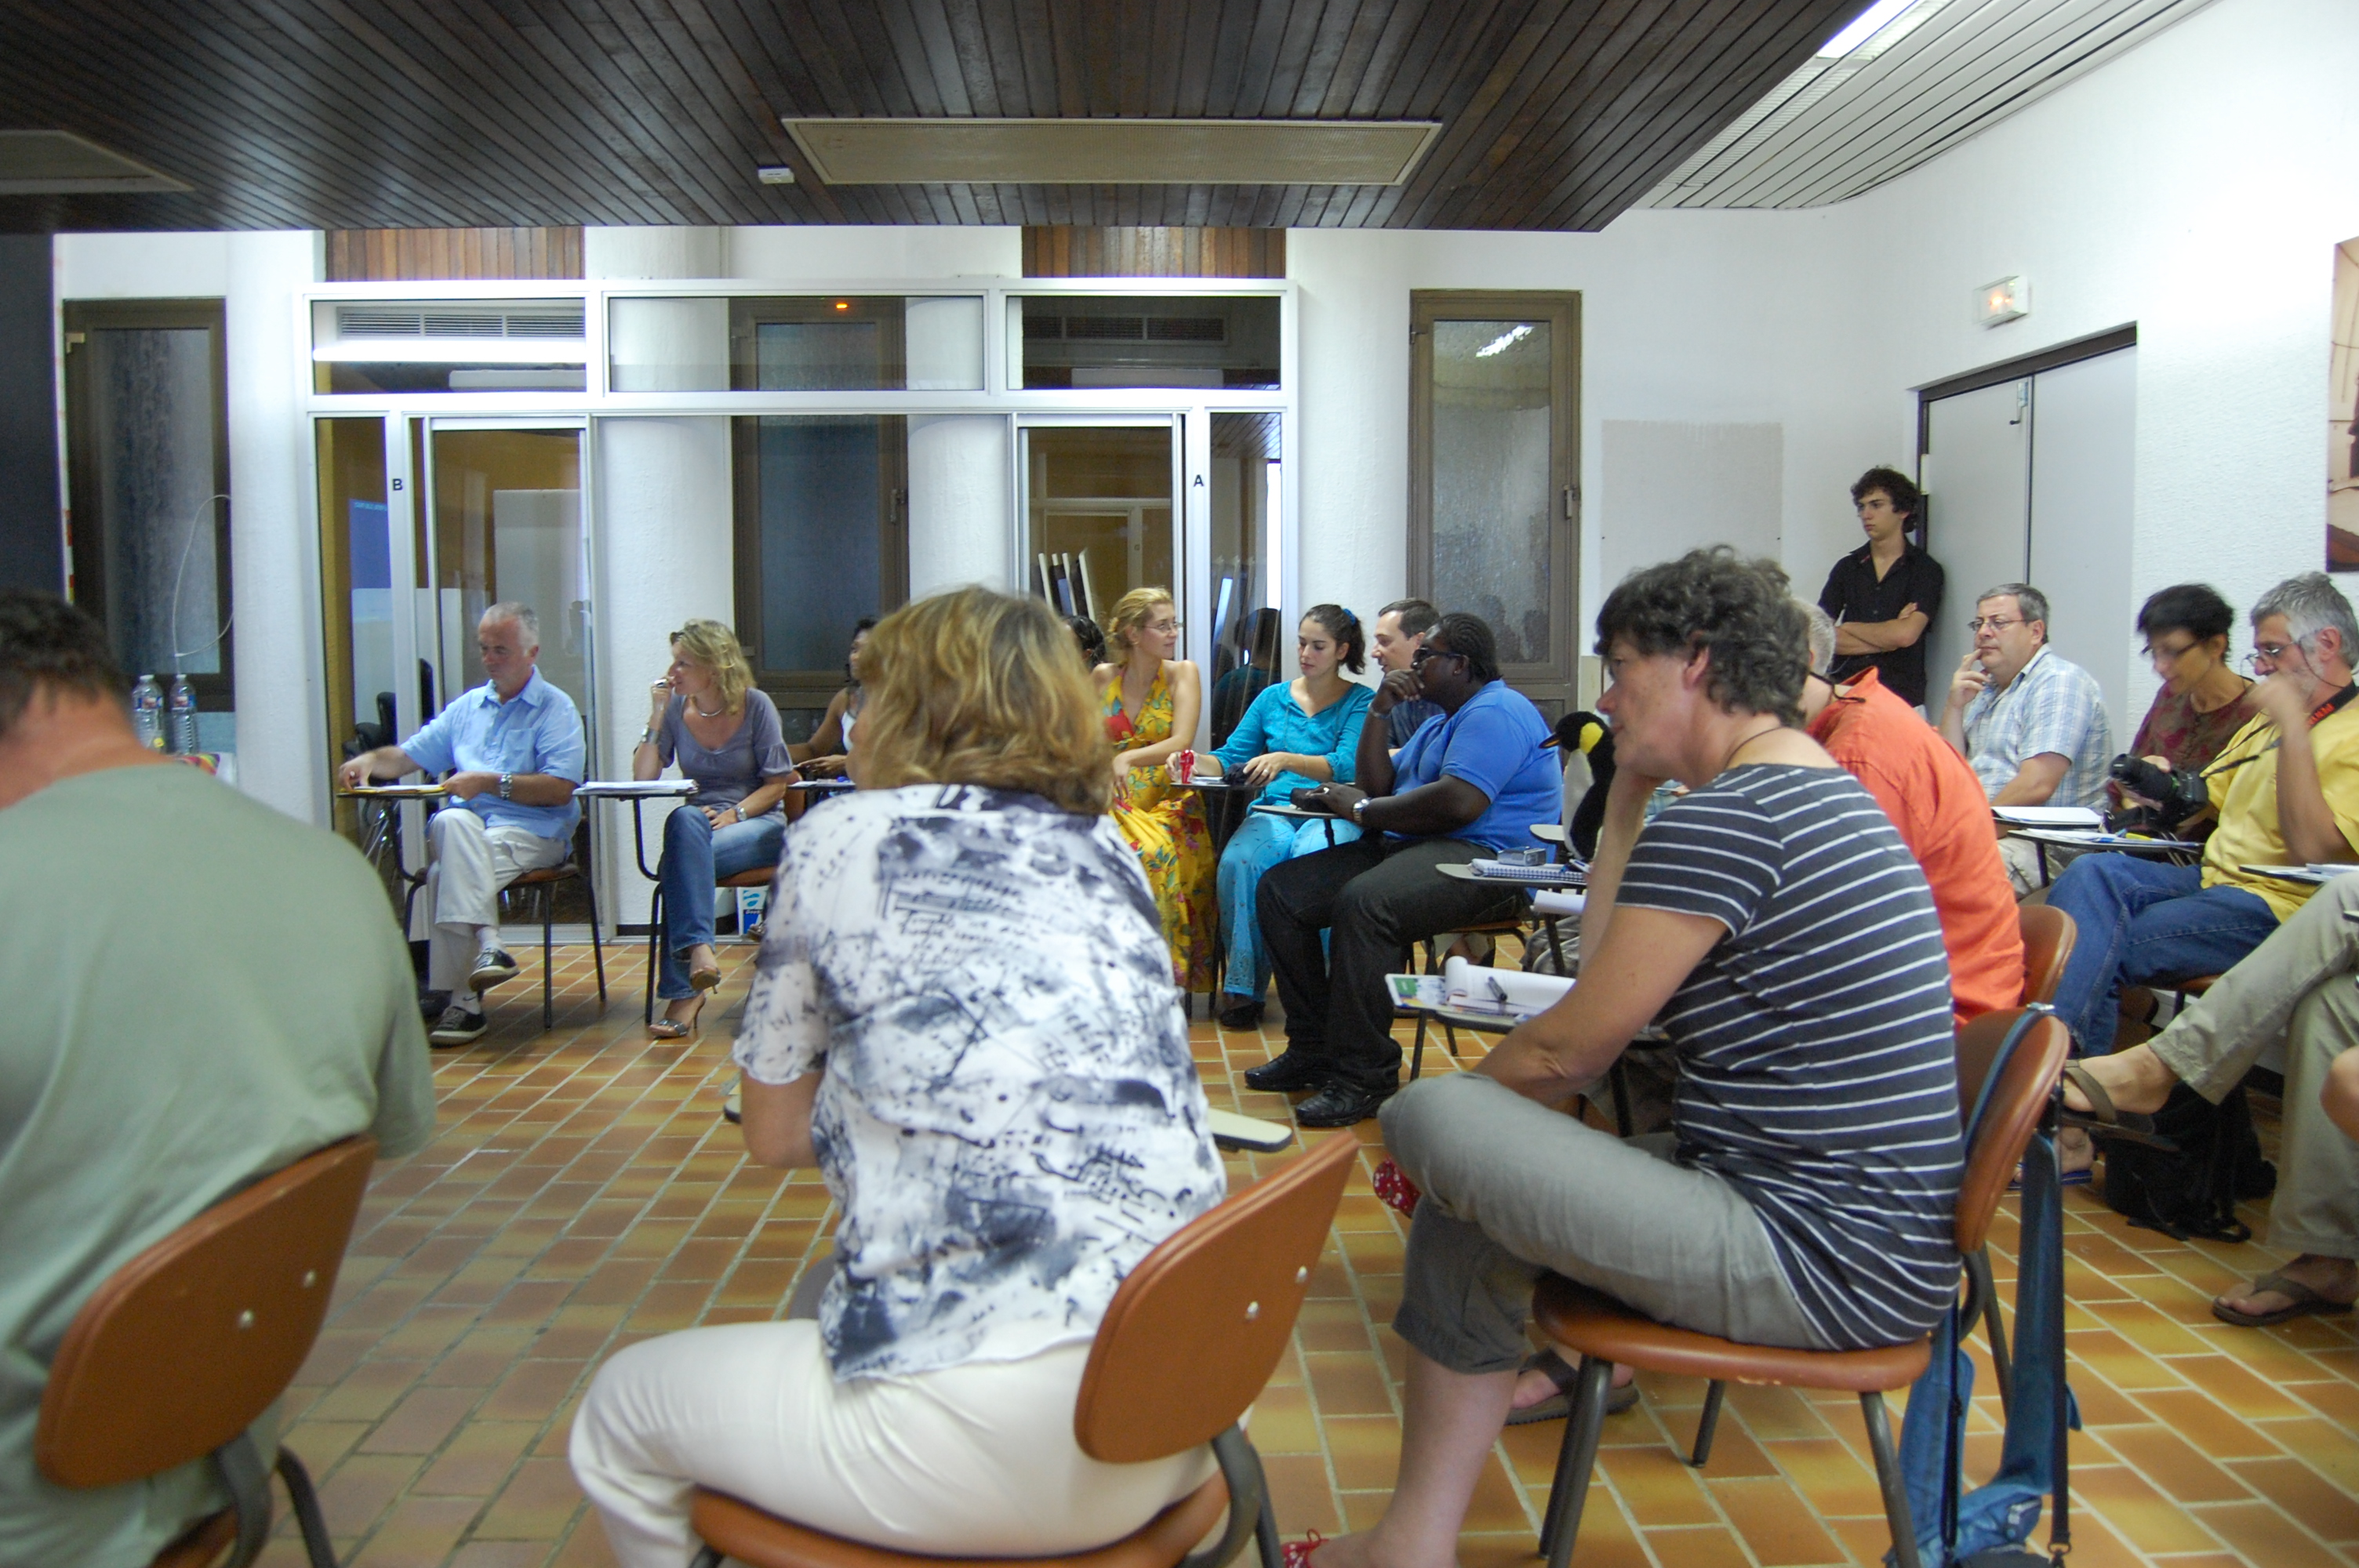 Approximately 30 teachers from France and French Guiana attended the workshop